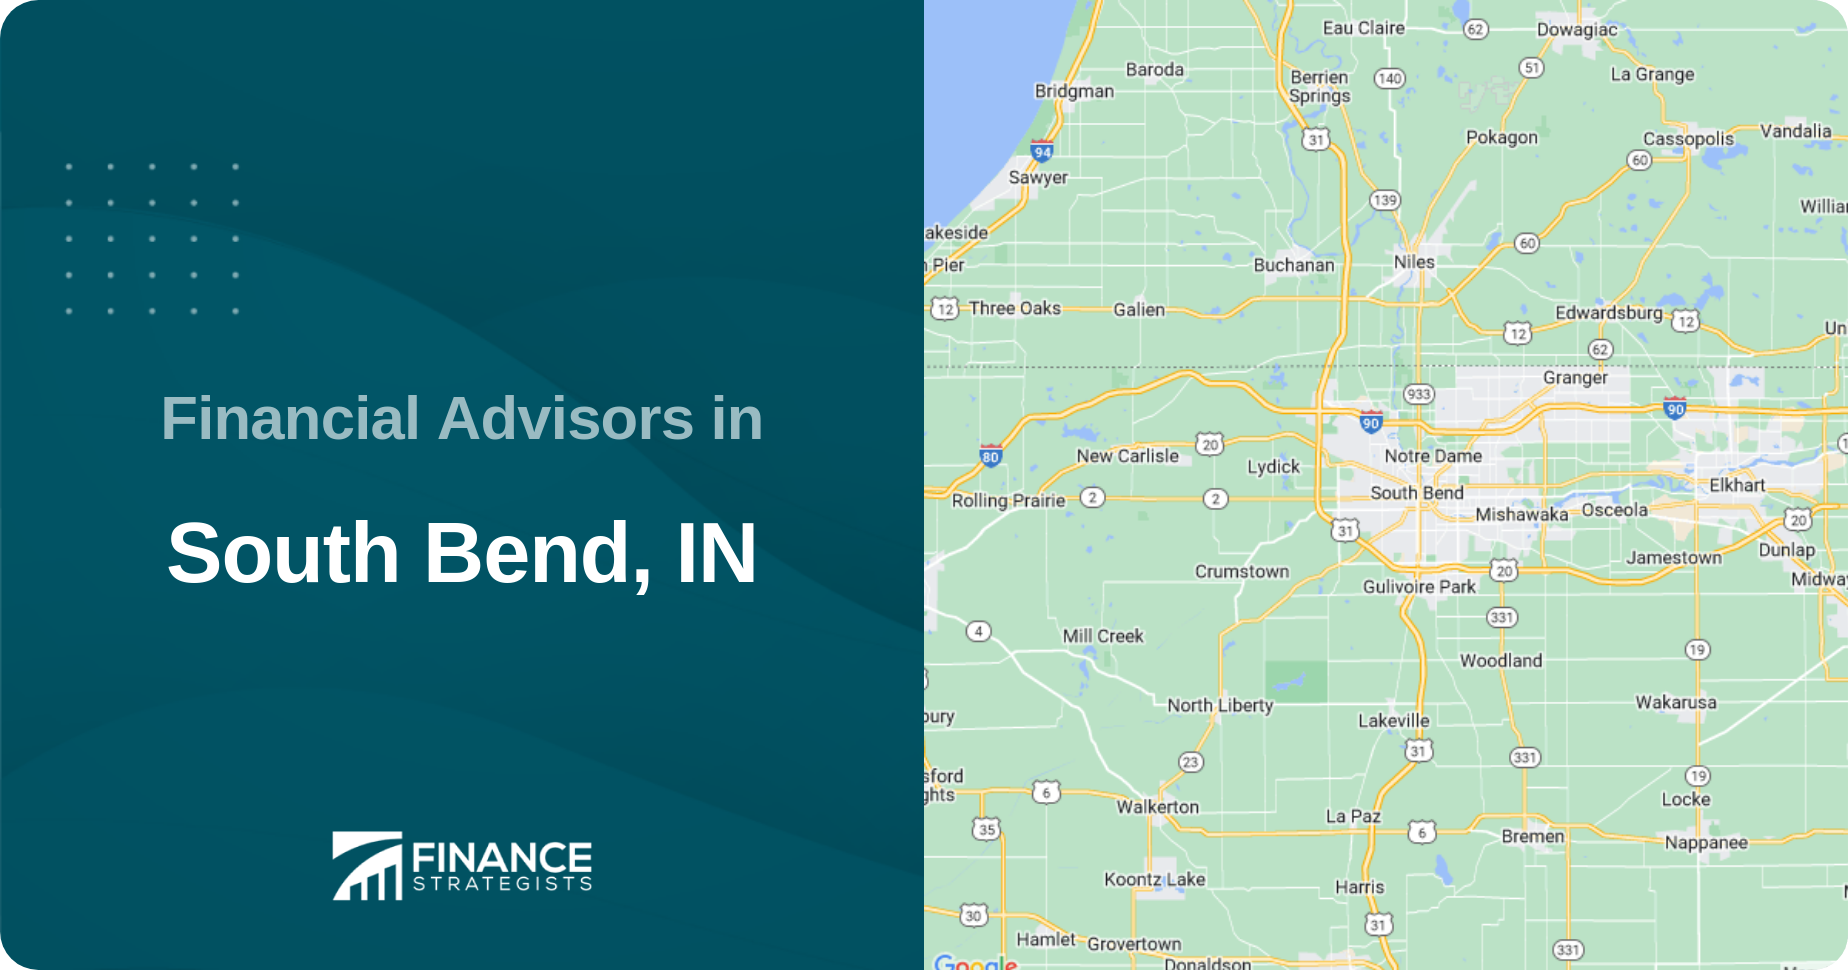 Financial Advisors in South Bend, IN